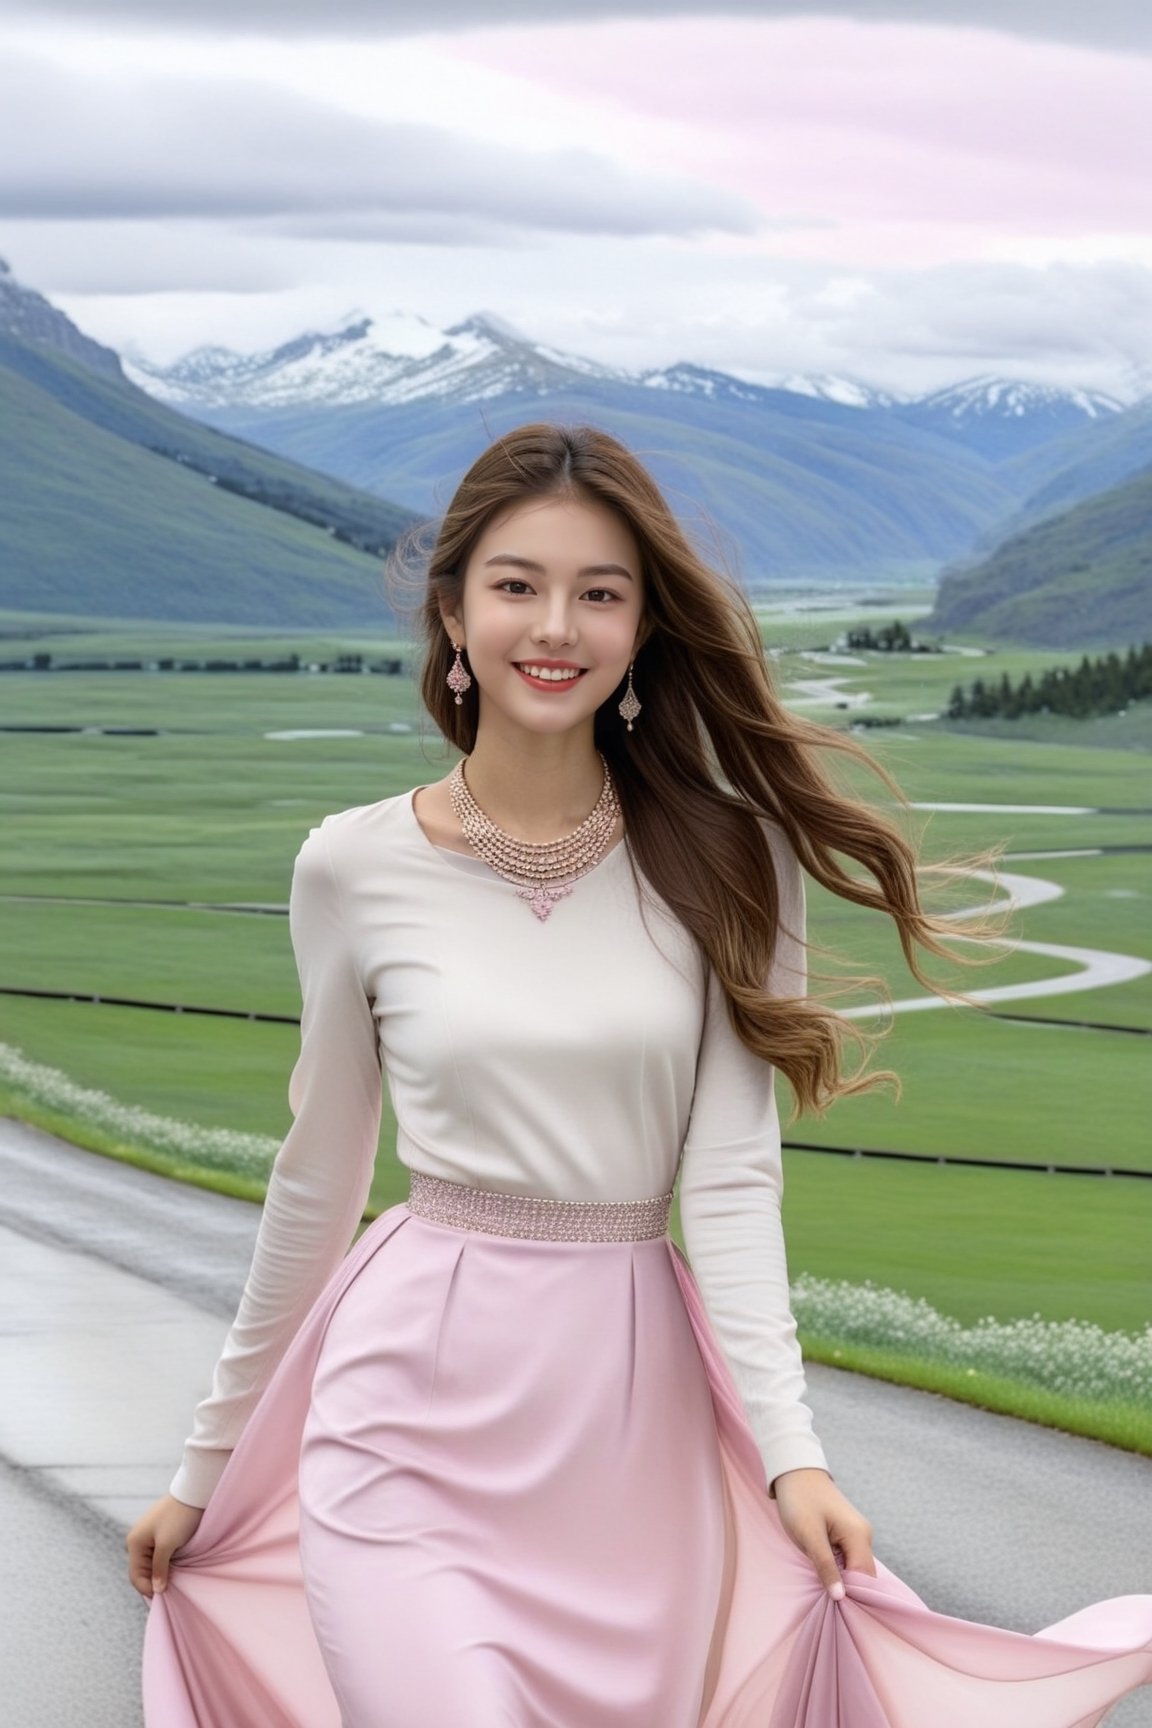 Hyper-Realistic photo of a girl,20yo,1girl,perfect female form,perfect body proportion,perfect anatomy,[pink and ivory color],elegant dress,detailed exquisite face,soft shiny skin,smile,mesmerizing,detailed shiny long hair blowing,small earrings,necklaces,Chanel bag,cluttered maximalism
BREAK
[backdrop of lamarva11ey,outdoors,sky,day, cloud,tree,cloudy sky,grass,nature,beautiful scenery,mountain,winding road,landscape,american bisons],(girl focus:1.2)
BREAK
(rule of thirds:1.3),perfect composition,studio photo,trending on artstation,(Masterpiece,Best quality,32k,UHD:1.4),(sharp focus,high contrast,HDR,hyper-detailed,intricate details,ultra-realistic,award-winning photo,ultra-clear,kodachrome 800:1.25),(infinite depth of perspective:2),(chiaroscuro lighting,soft rim lighting:1.15),by Karol Bak,Antonio Lopez,Gustav Klimt and Hayao Miyazaki,photo_b00ster,real_booster,art_booster,Ye11owst0ne,koh_yunjung,ink 